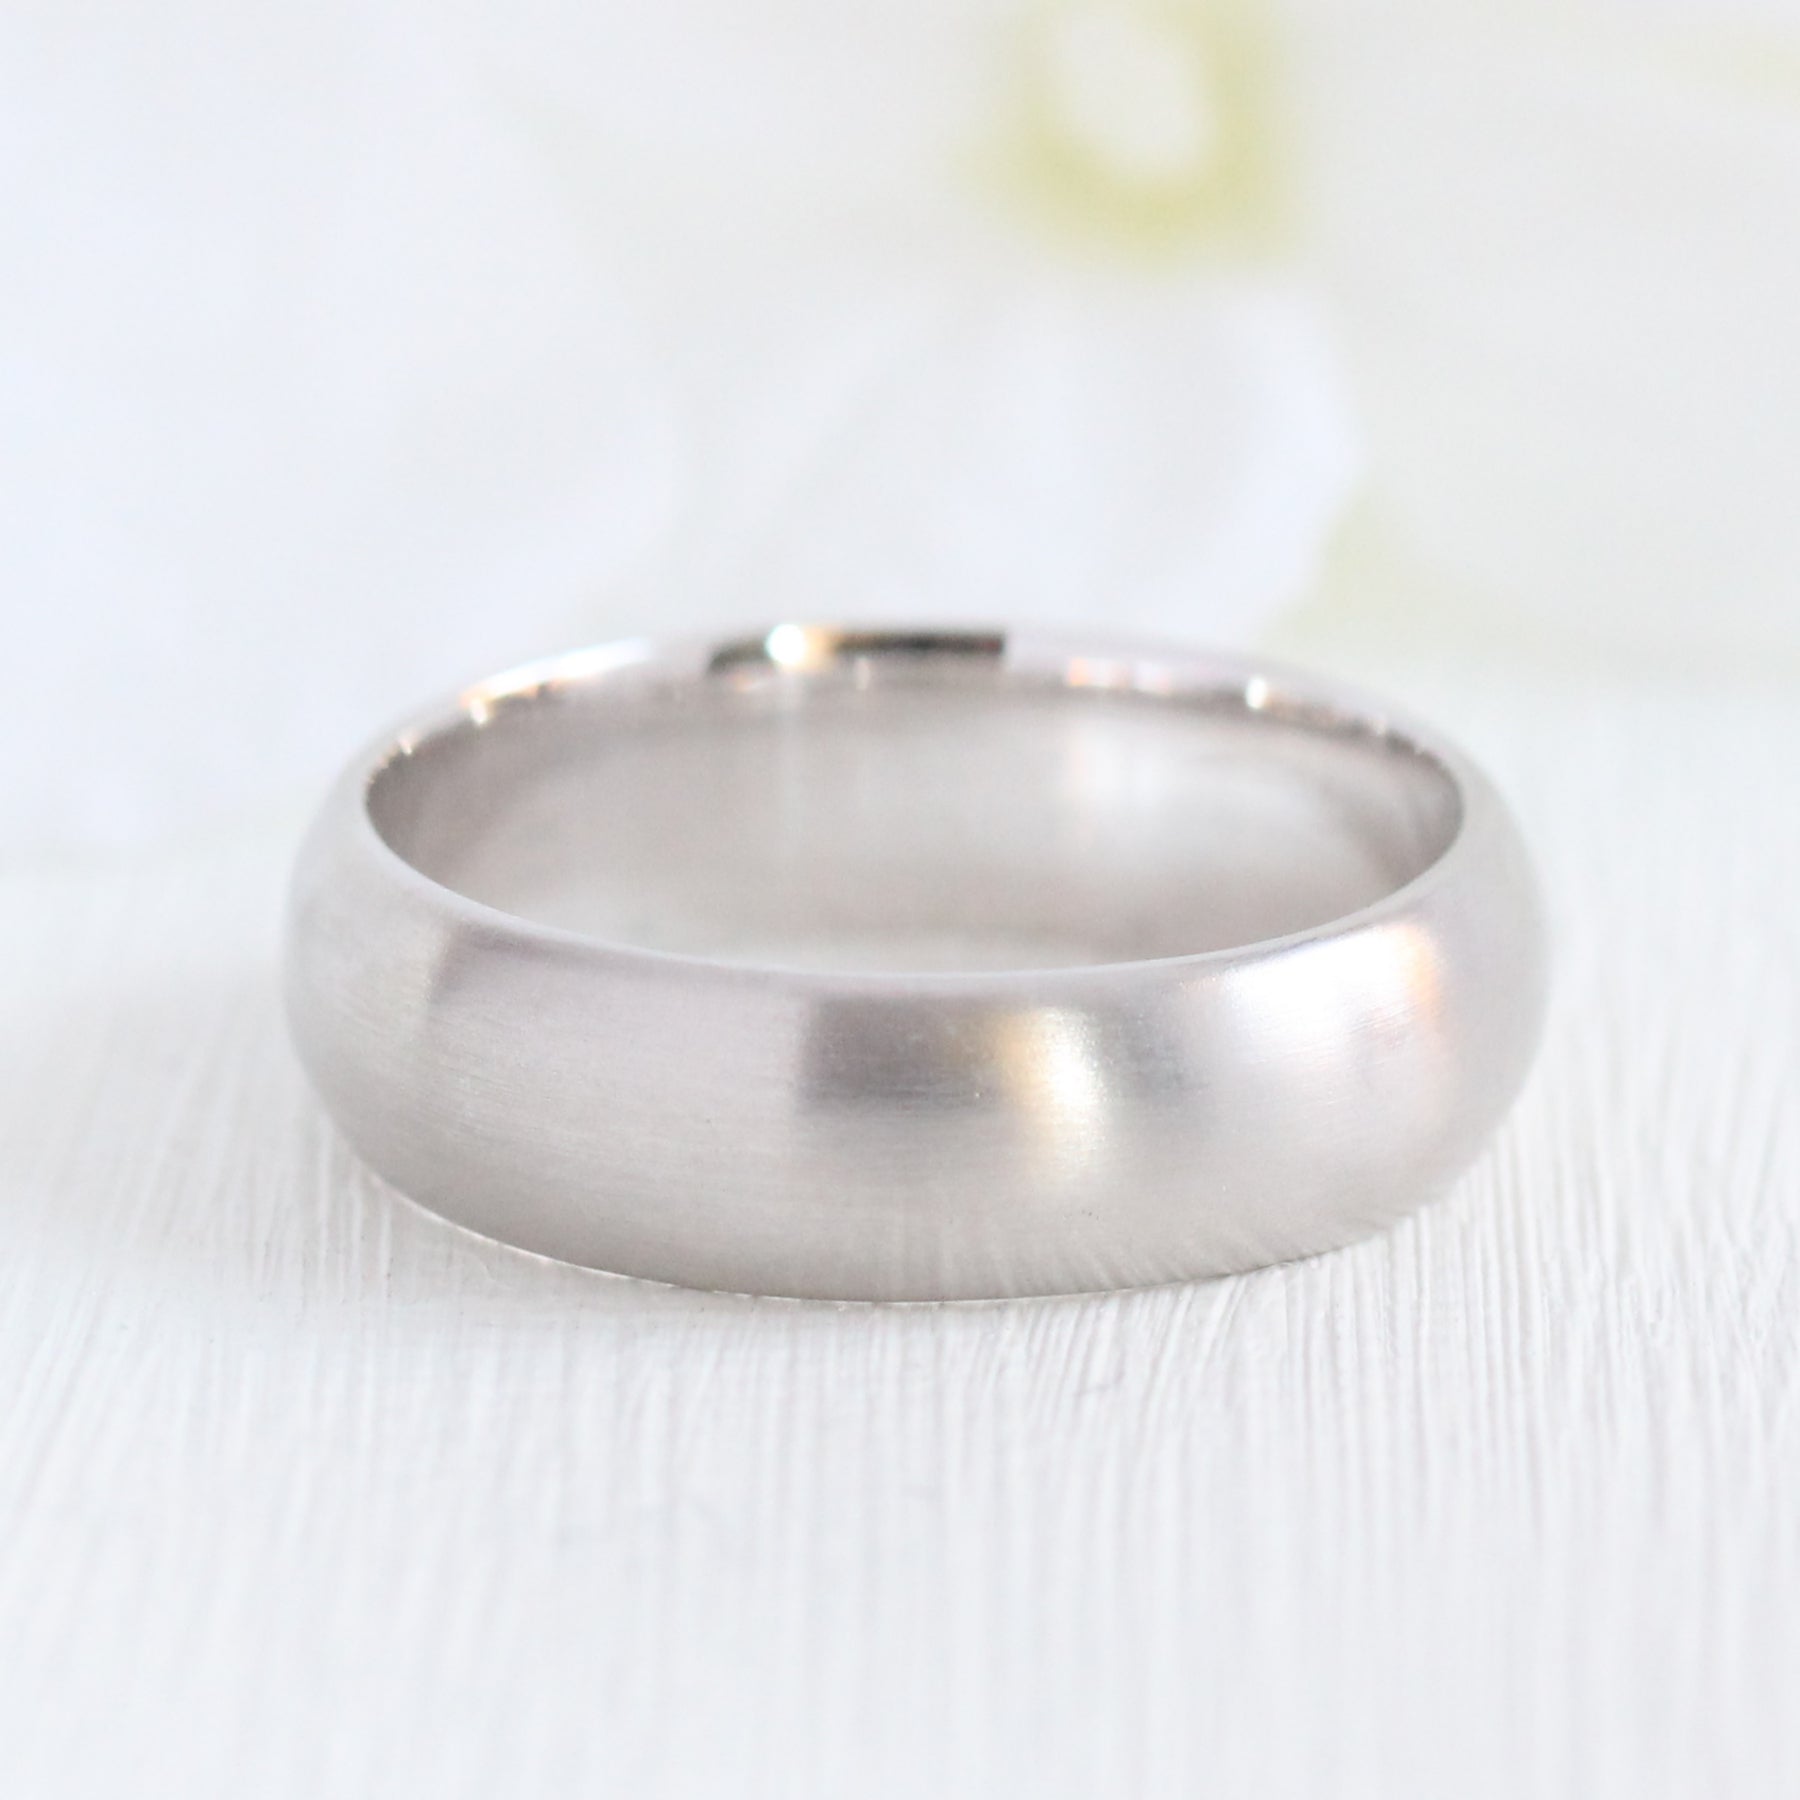 Mens wedding ring white gold domed wedding band matte finish gold ring la more design jewelry